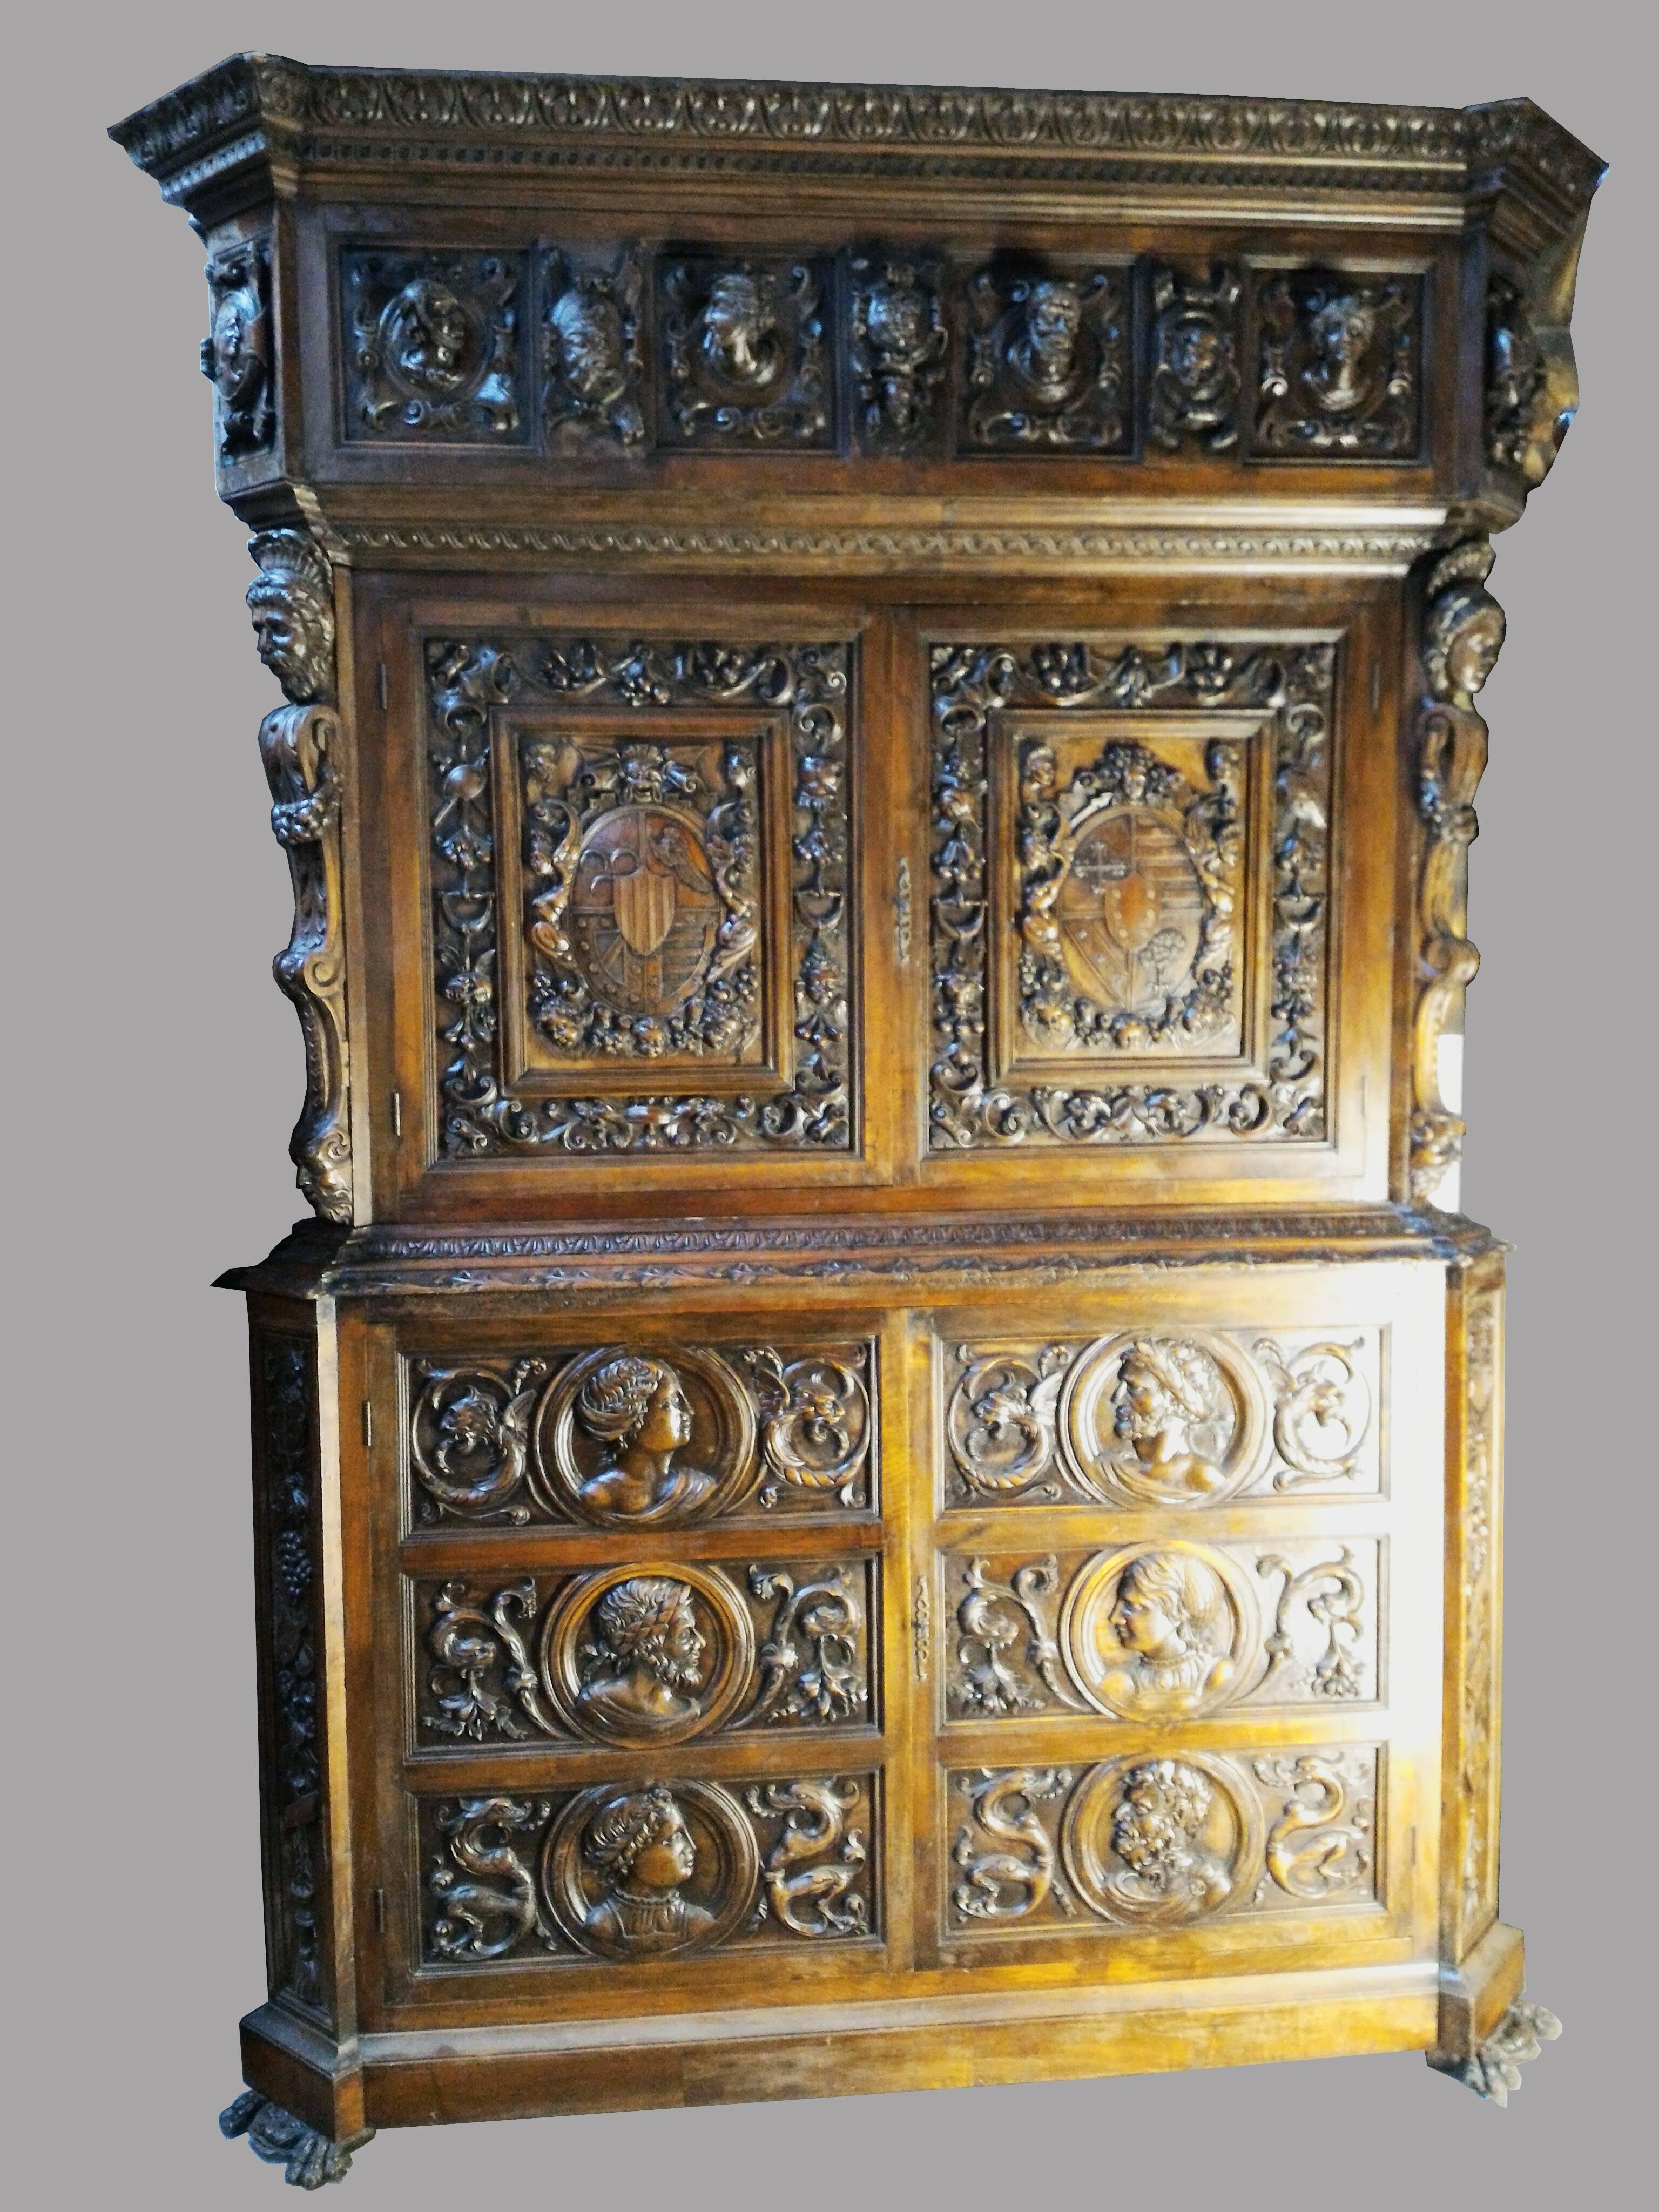 Impressive Renaissance Revival style in solid hand-carved walnut wood. Majestic size, shape and ornaments.
Richly carved and decorated with Royal coat of arms and noble characters. In a very good original condition.
France, 19th century, circa